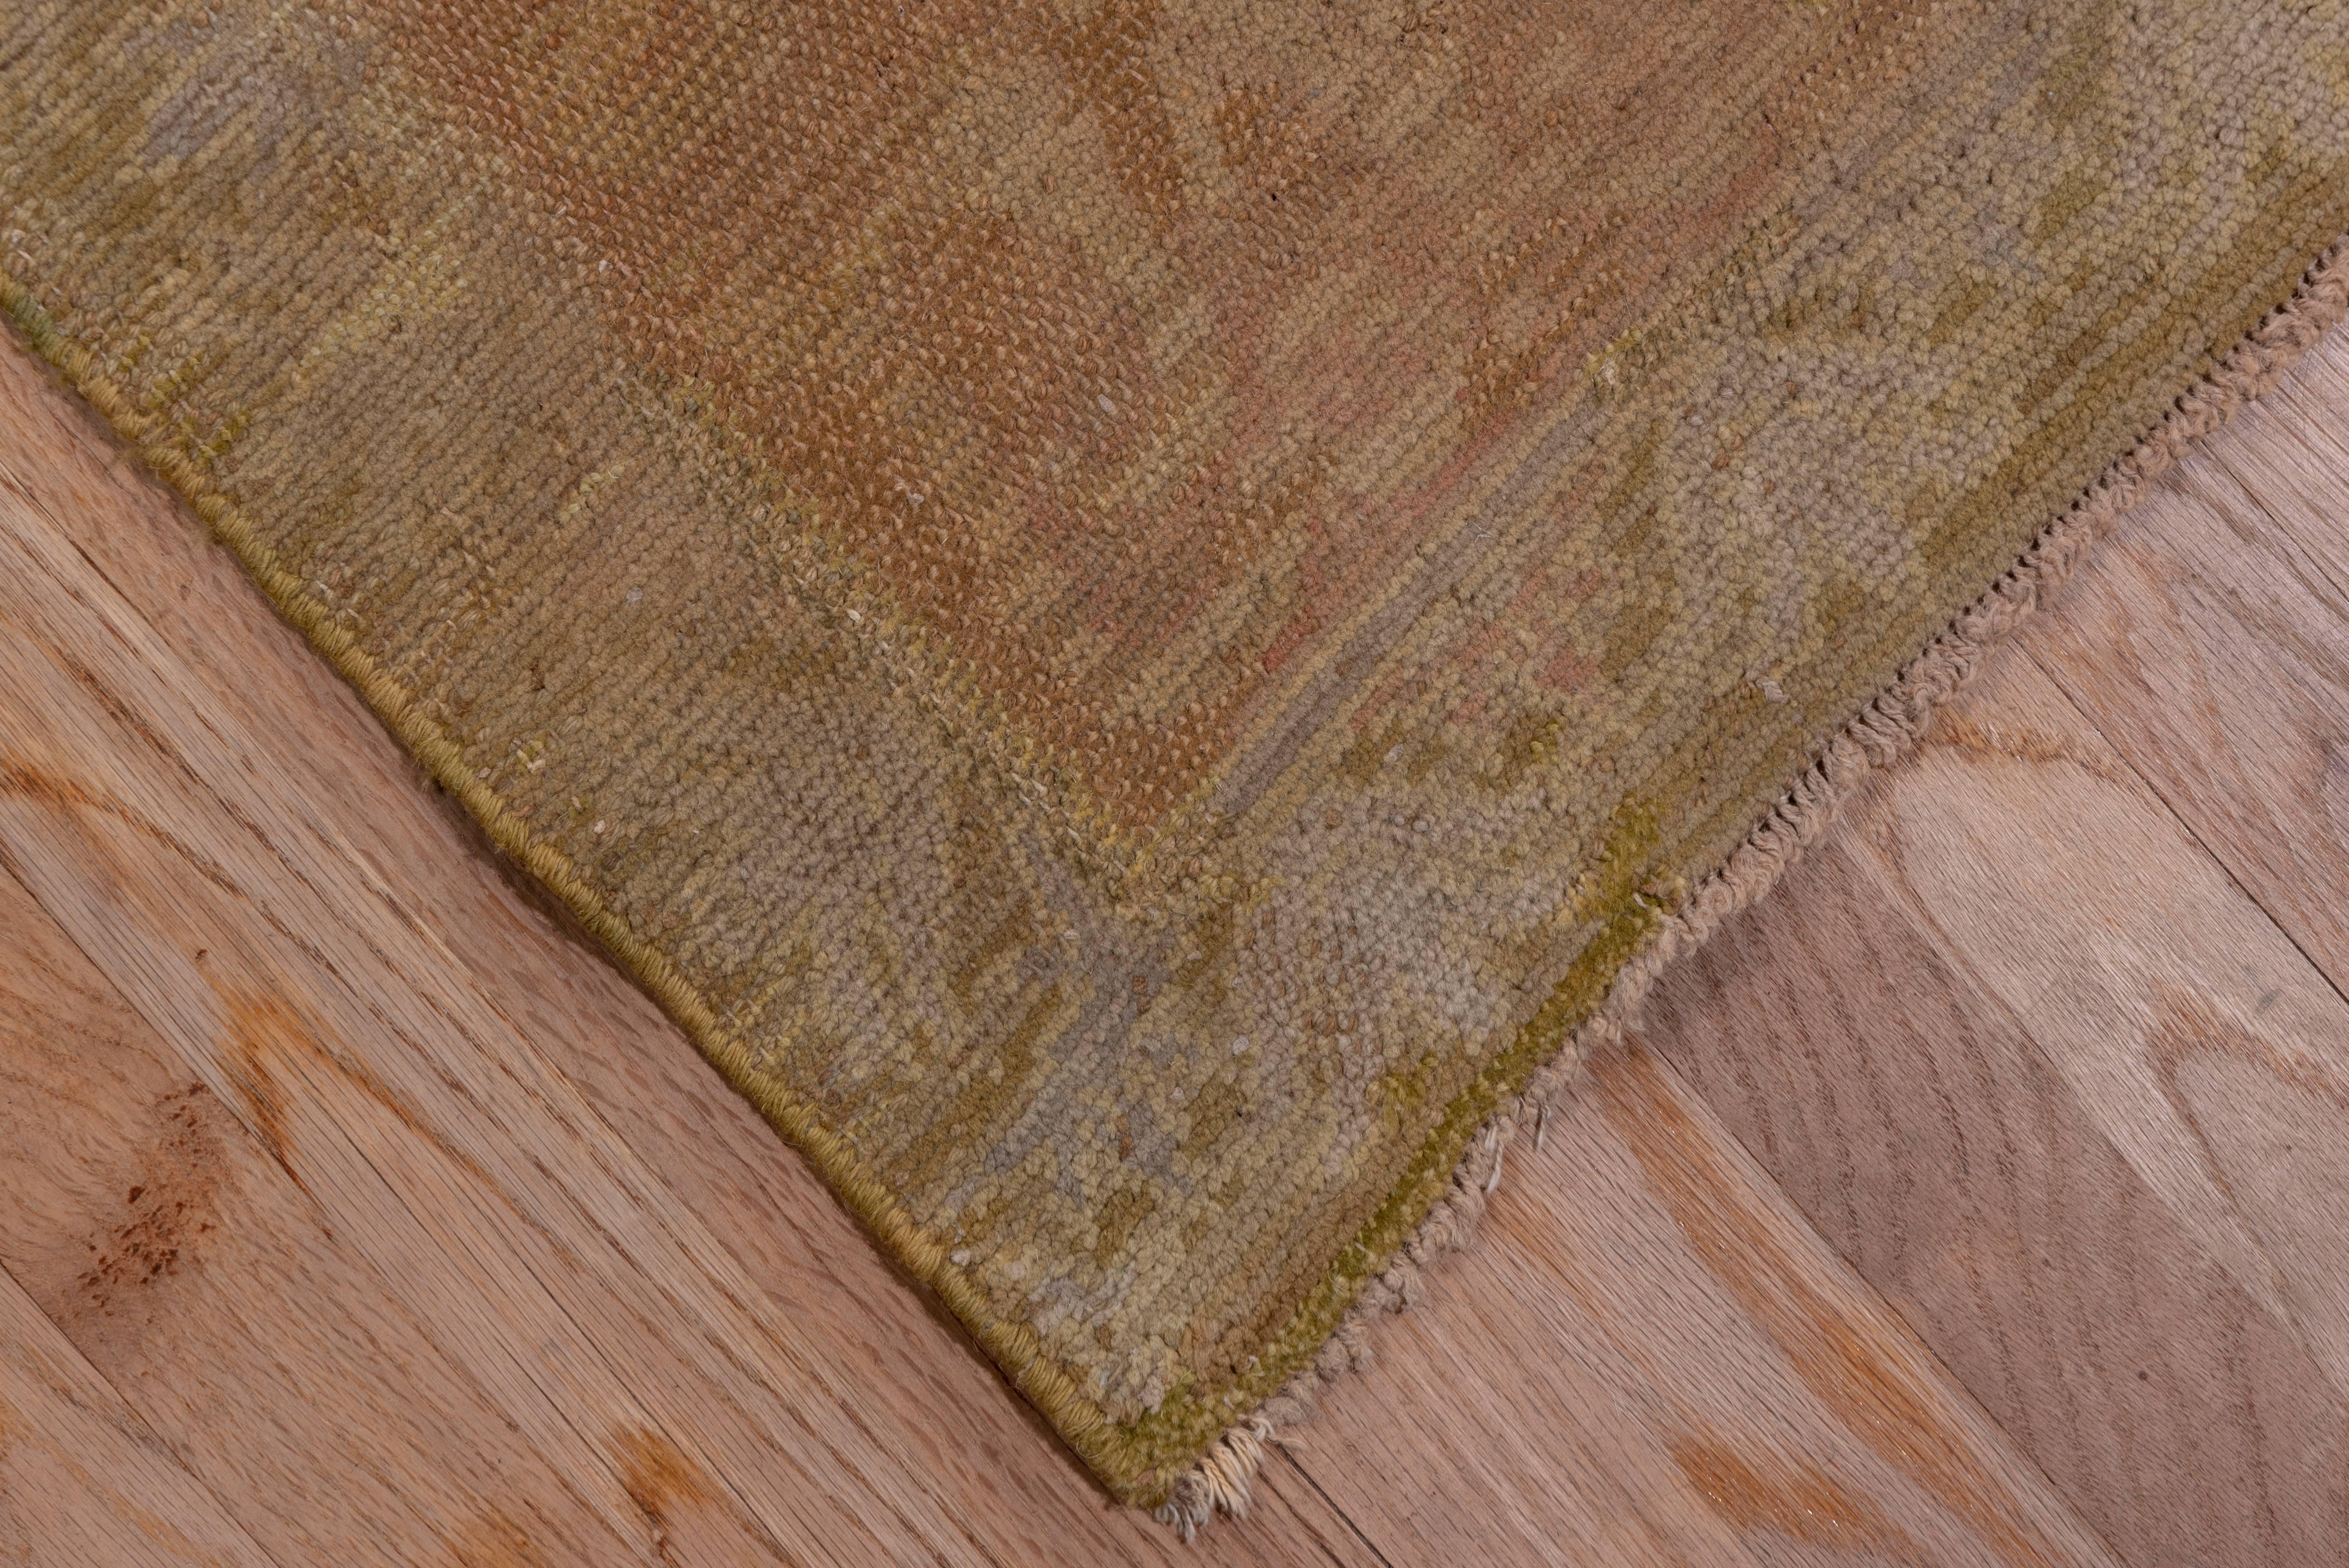 Single wefted and tied with single warp knots, this tone-on-tone Cuenca carpet has a golden beige field displaying a curved tree and cartouche pattern in a light brown. The neutral effect continues with the main border in quasi-Islamic script. Only